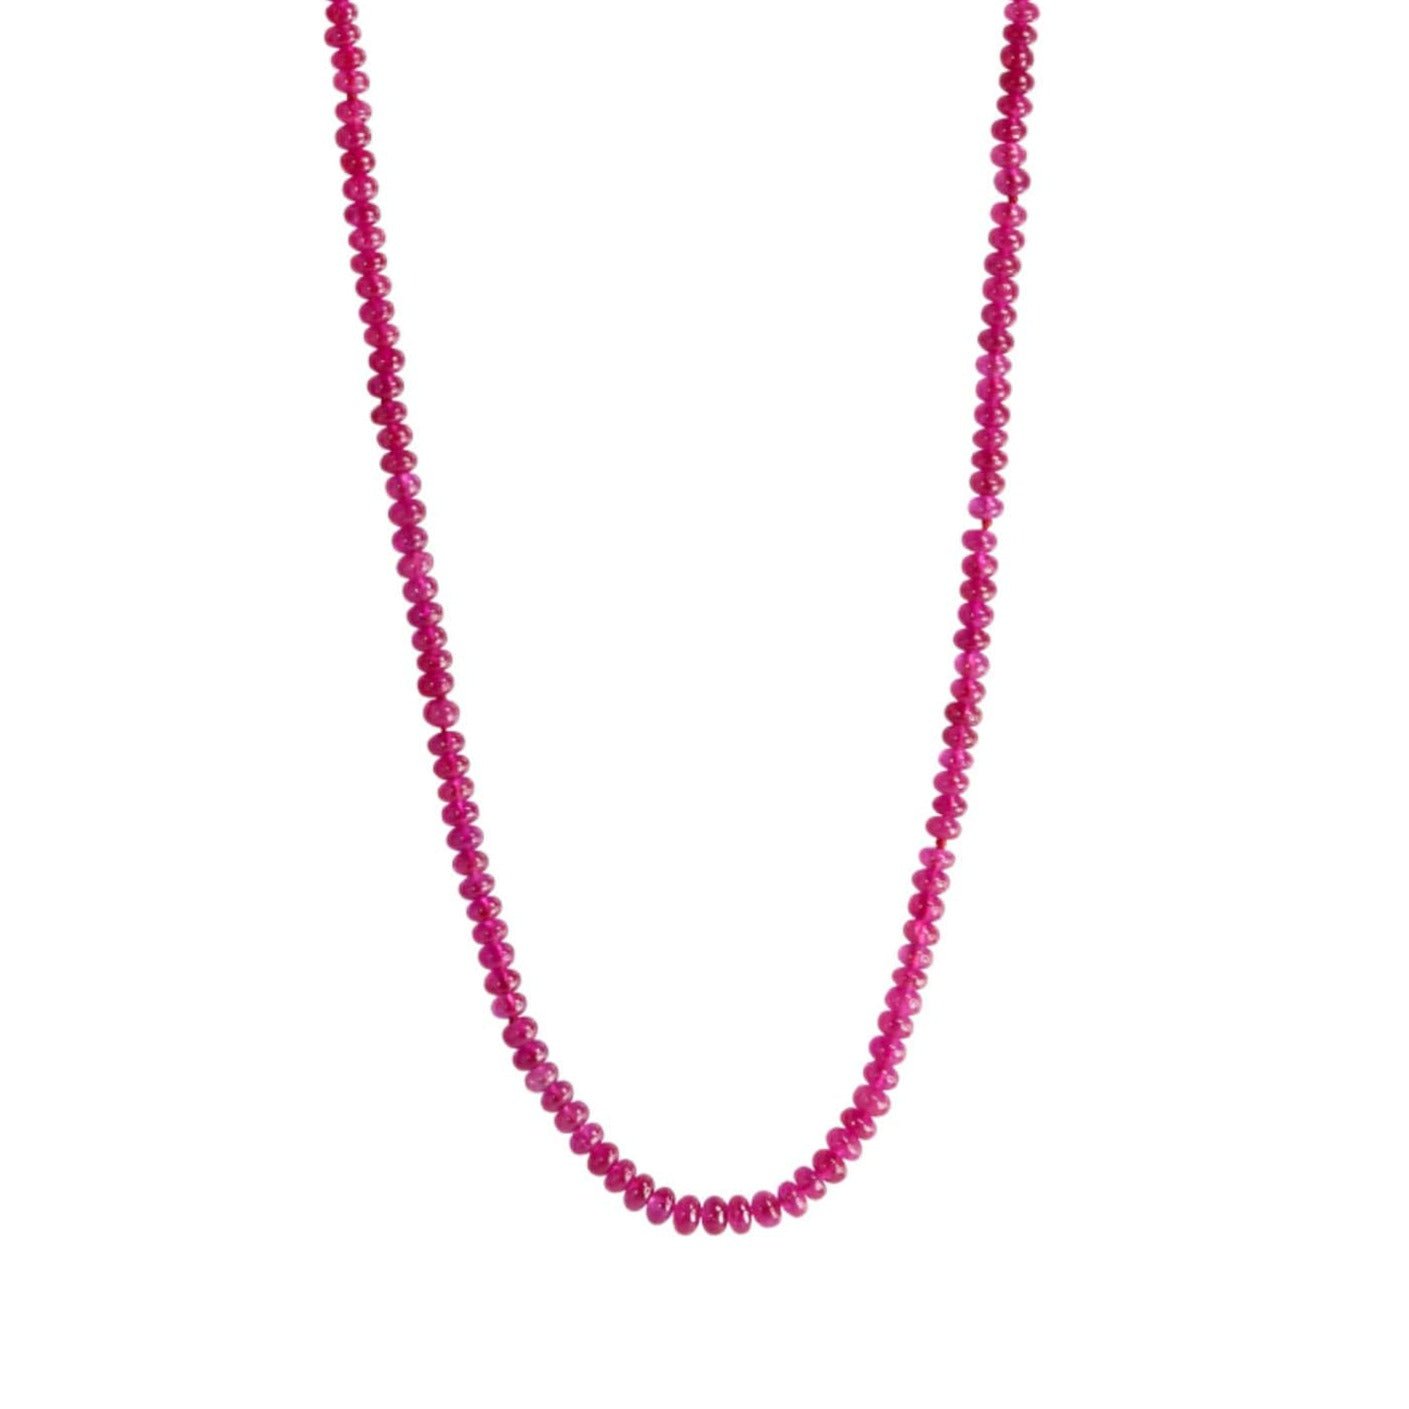 60.0 Inch Wrap or Flapper Length Small Glass Beads necklace - Ruby